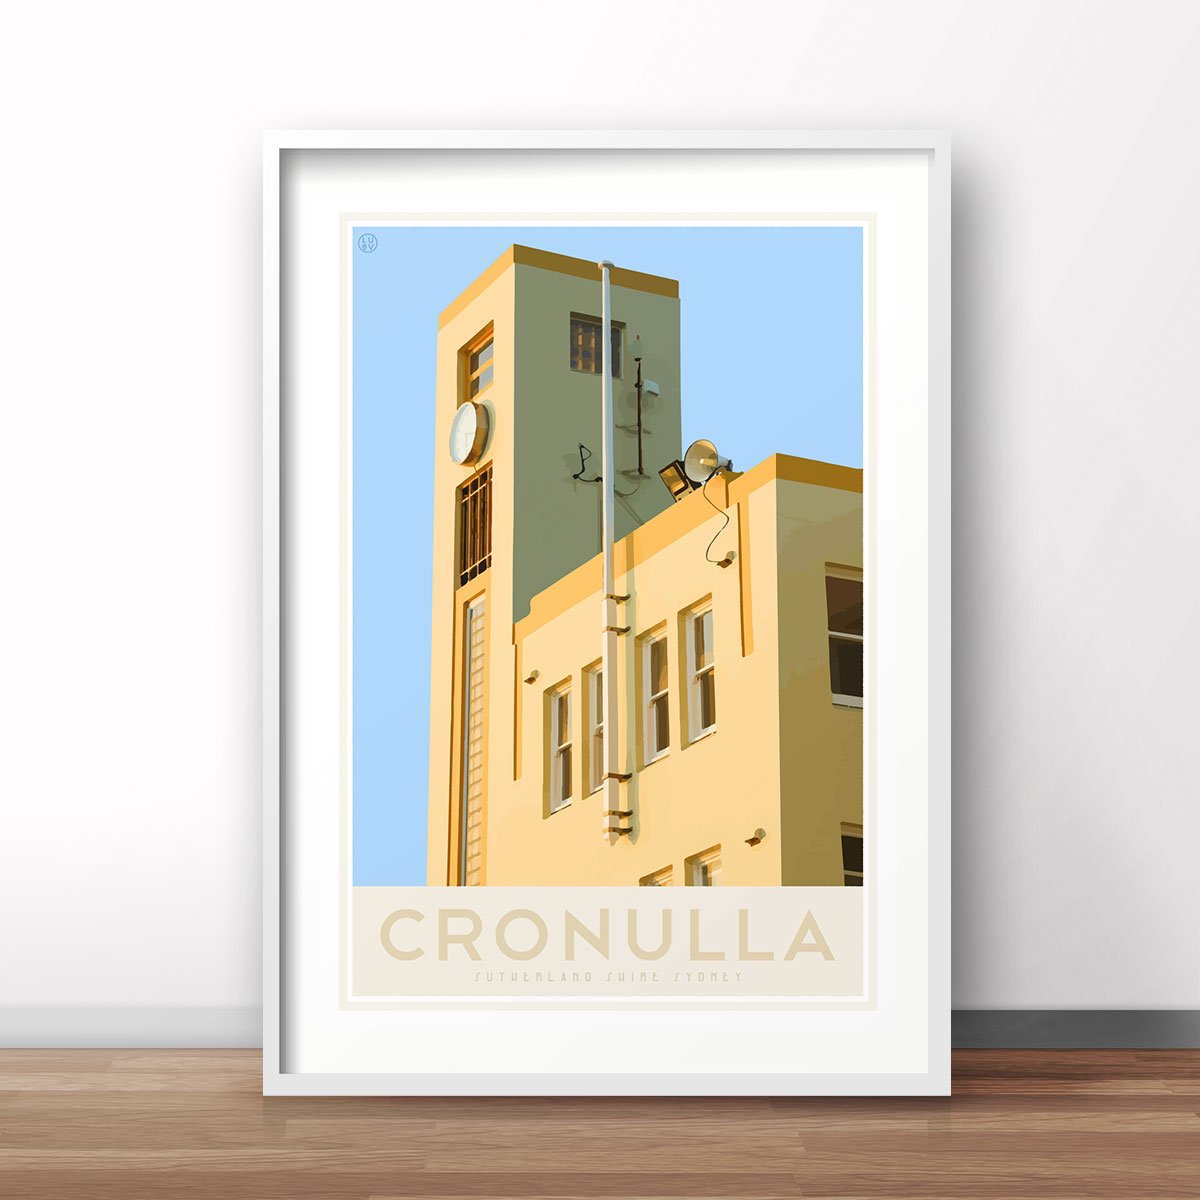 Cronulla Beach vintage style travel print, interior favourite, designed by places we luv